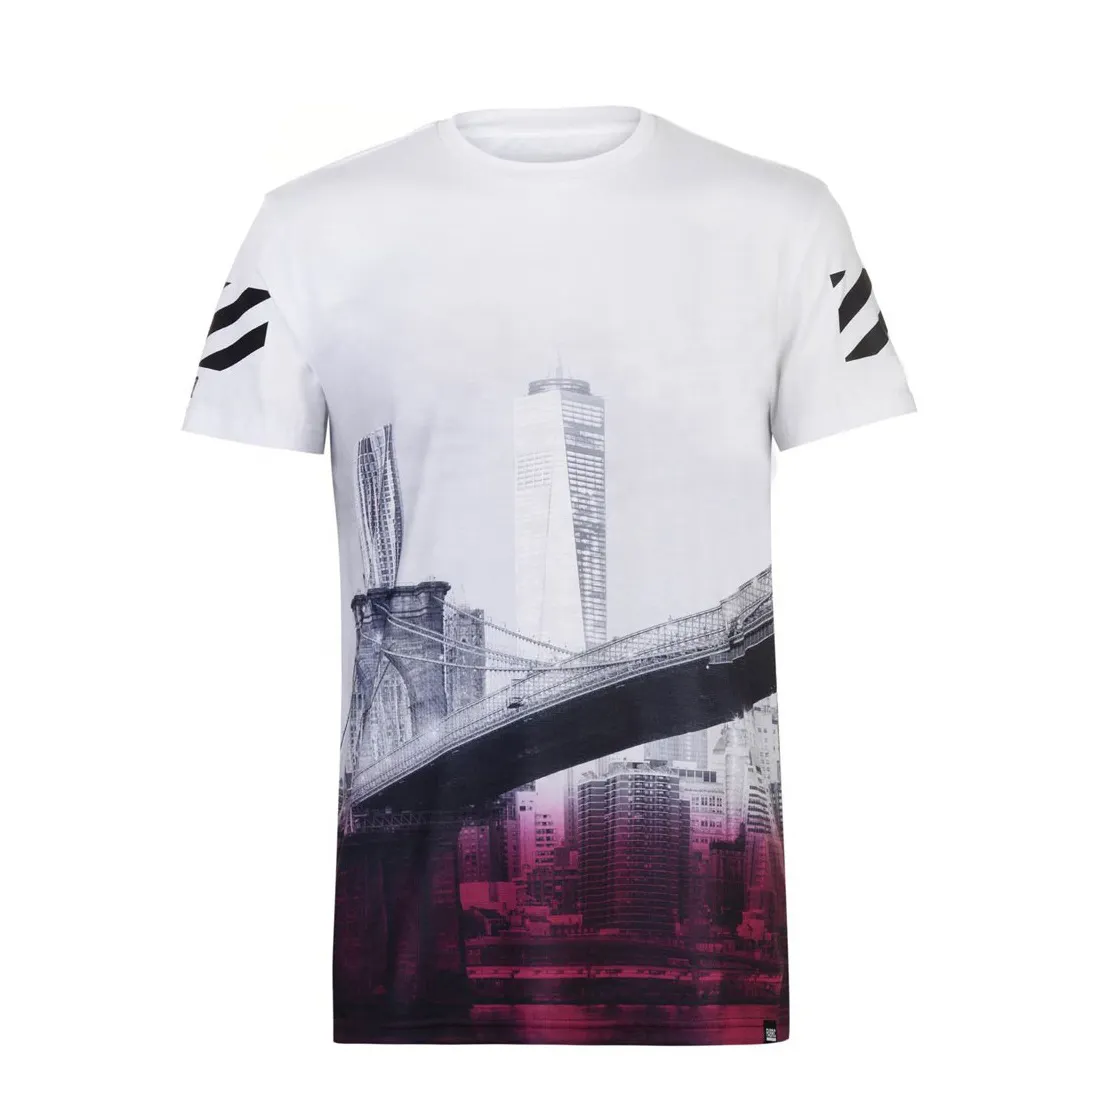 2022 New Arrival Latest Design Sublimation T Shirt Best Quality Good Price printed comfortable T Shirt Fancy sports